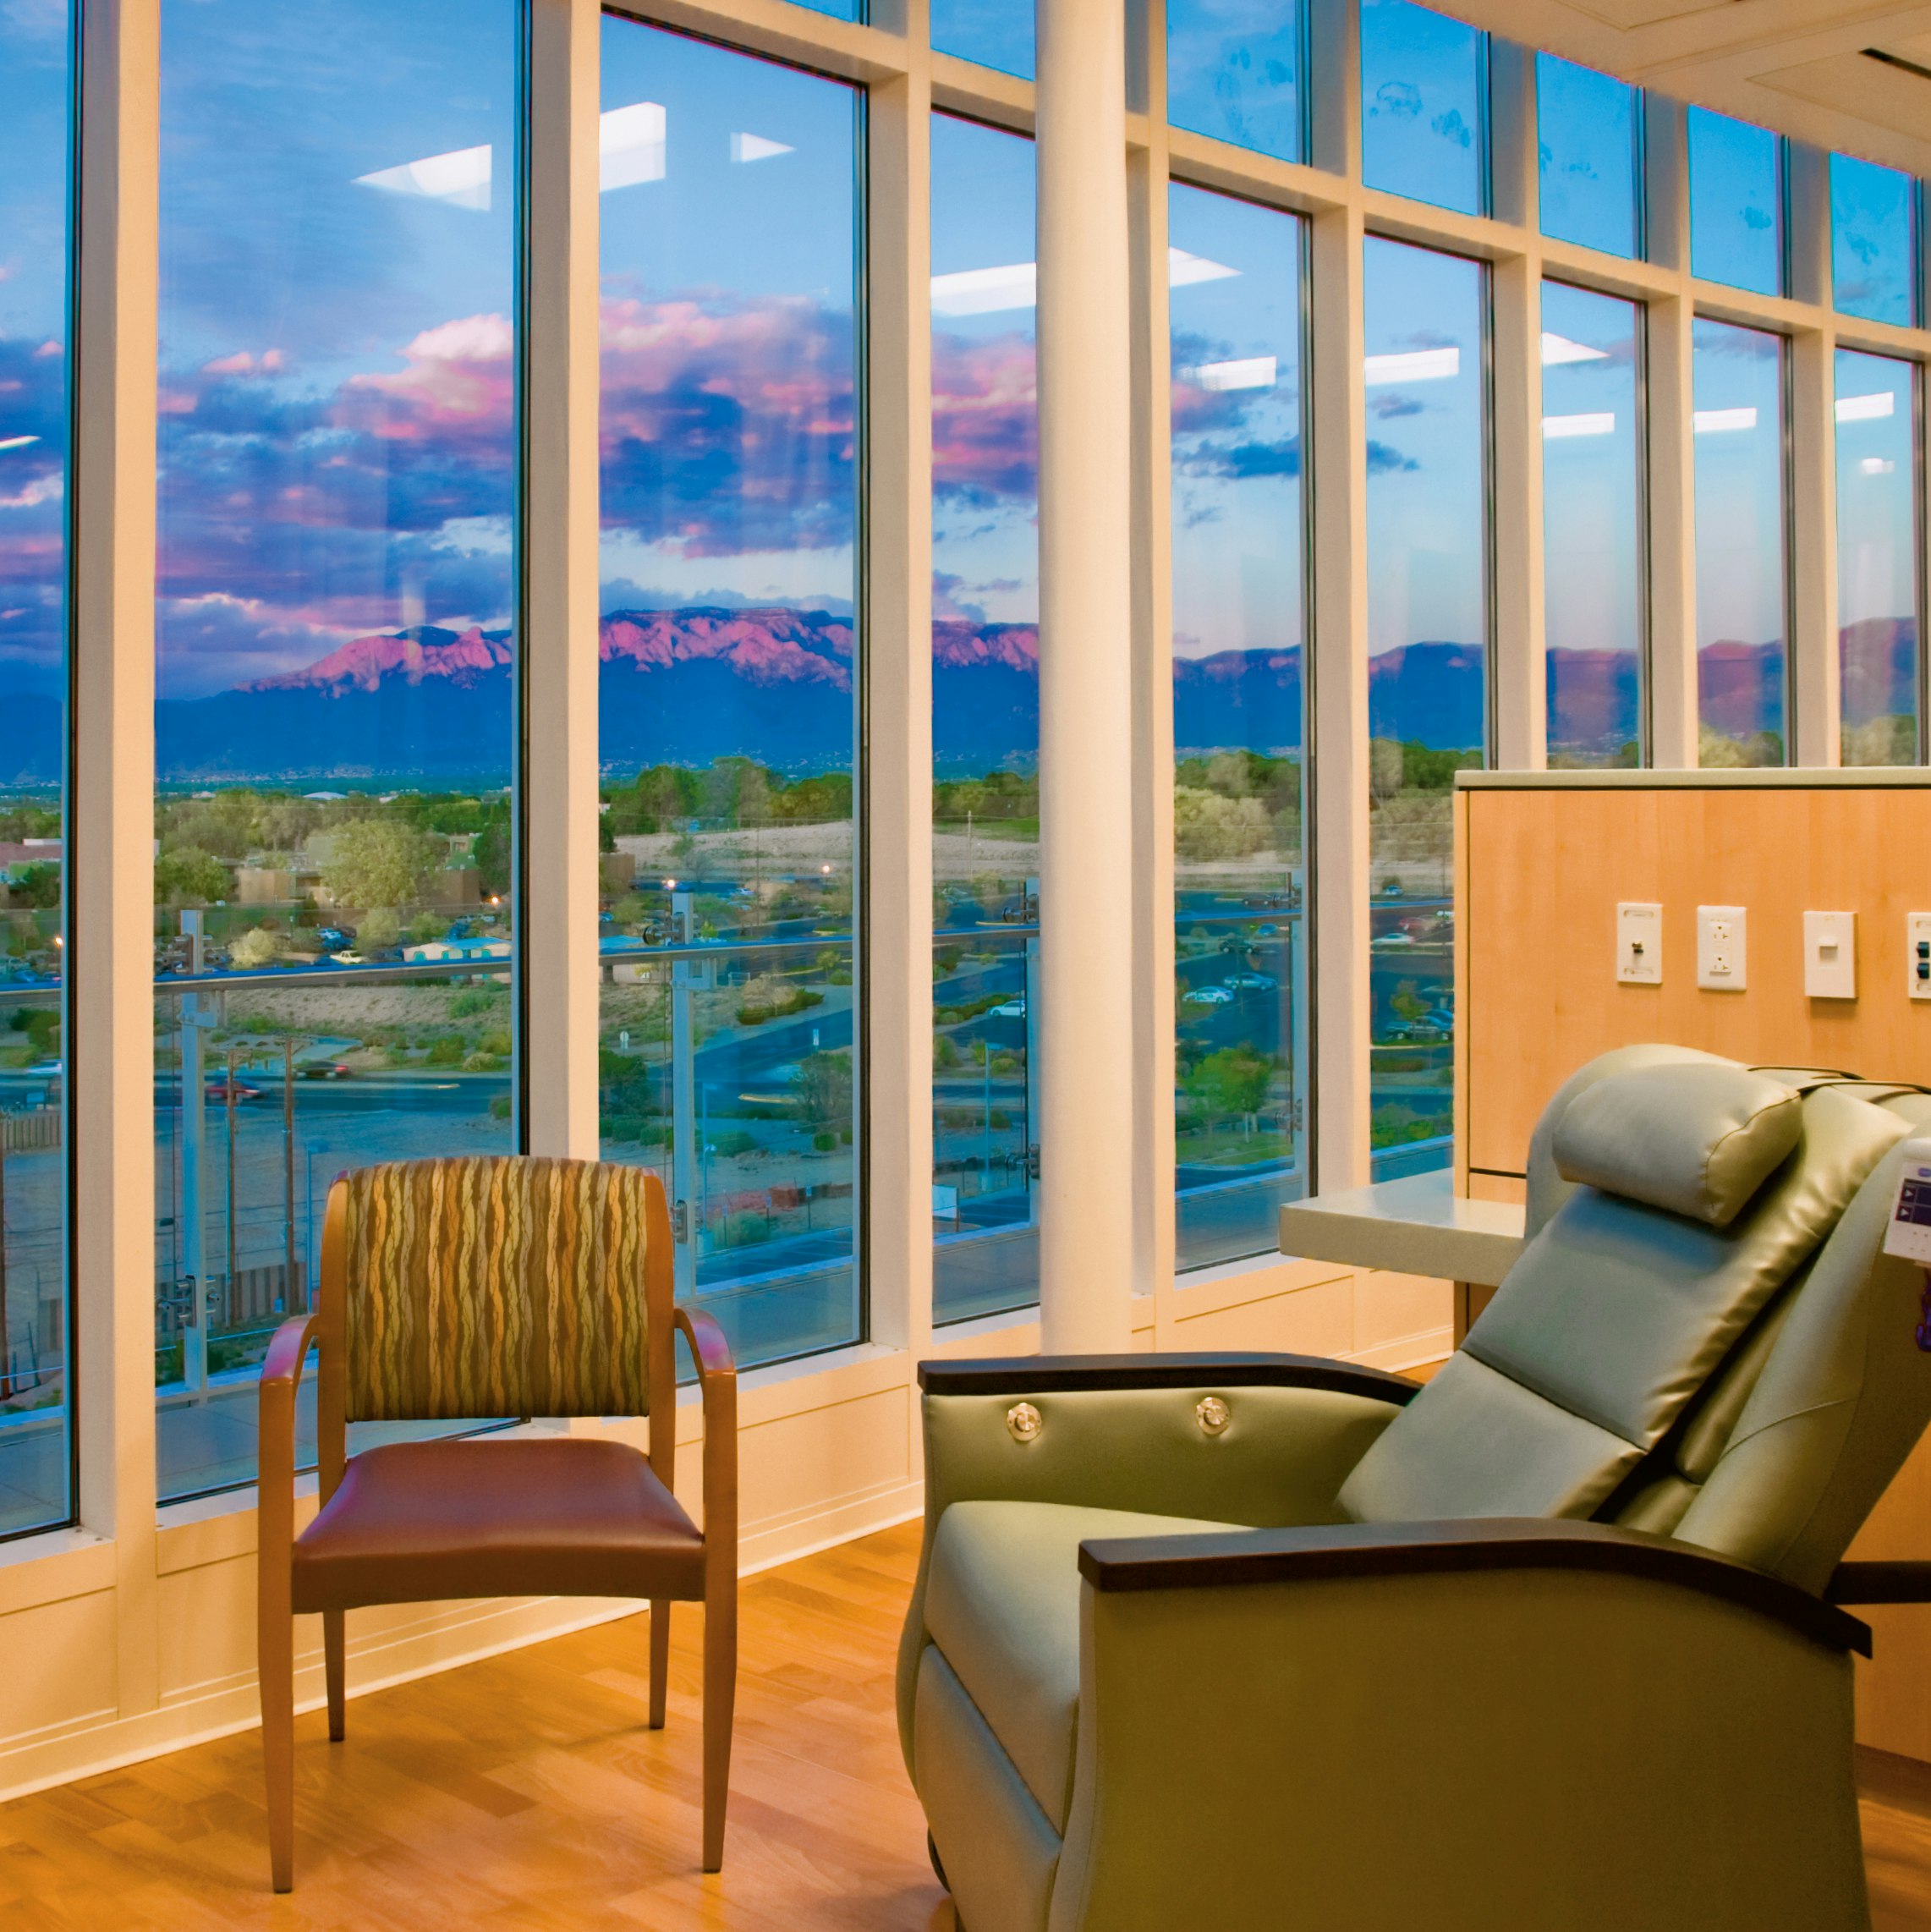 The chemotherapy infusion suite with a view of the Sandia Mountains at the University of New Mexico Cancer Center (UNMCC) in Albuquerque. Since first achieving National Cancer Institute designation in 2005, UNMCC and its consortium institutions -- Lovelace Respiratory Research Institute, Los Alamos National Laboratory, and Sandia National Laboratories -- have built a single transdisciplinary cancer-focused research enterprise and statewide networks for cancer care delivery and community participatory research.